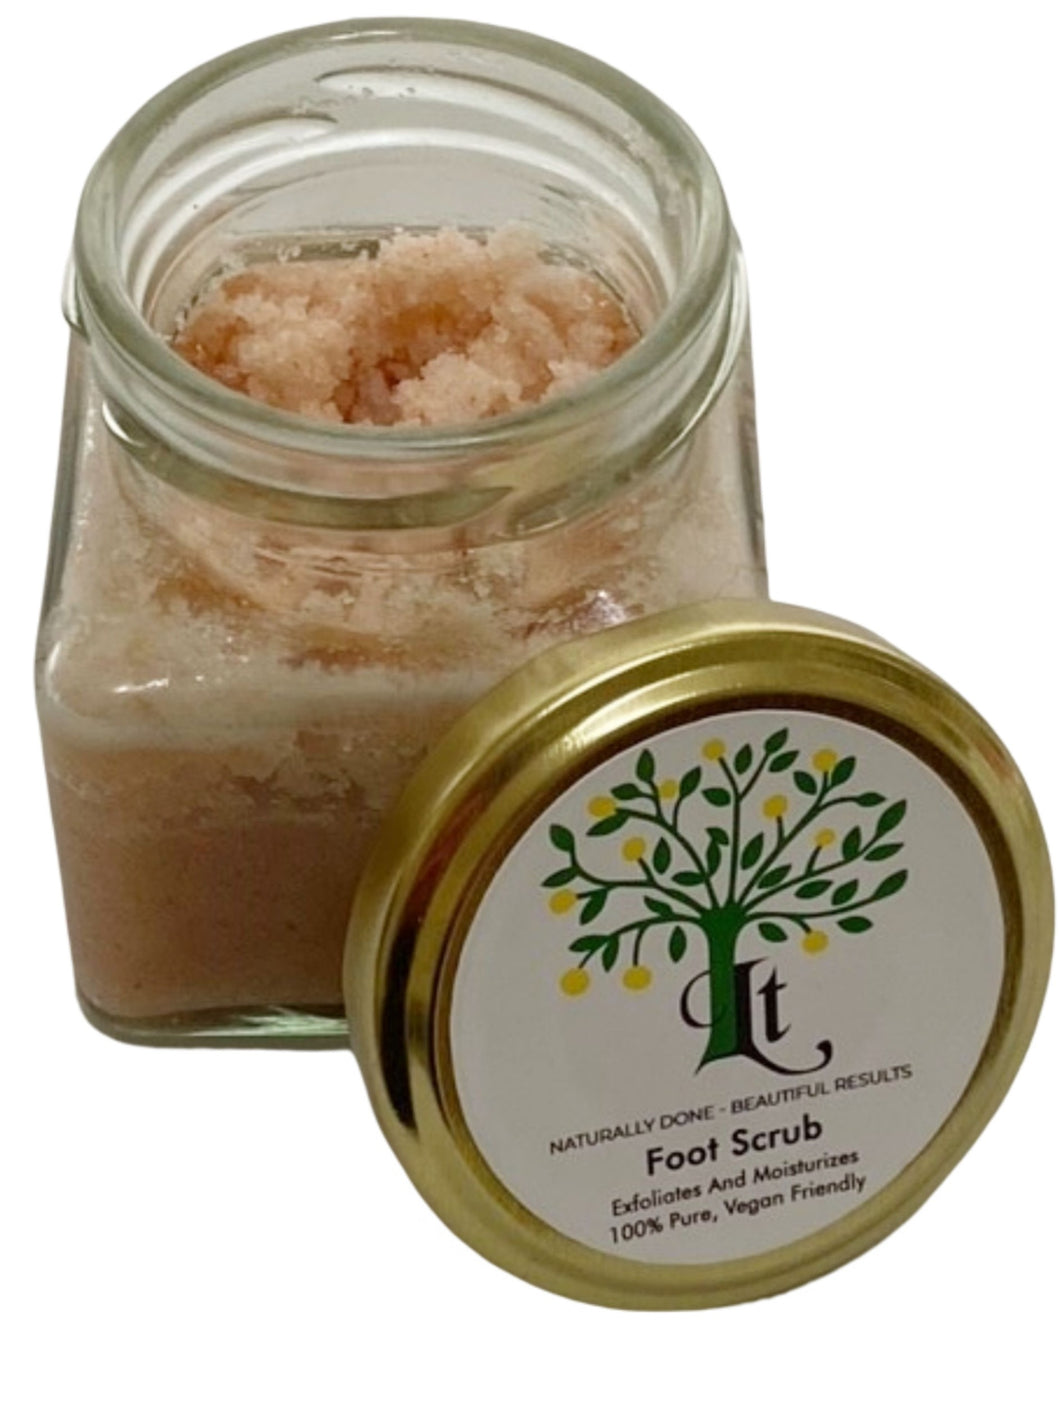 Foot Scrub To Nourish And Revitalise Dry Tired Feet, 100% Natural